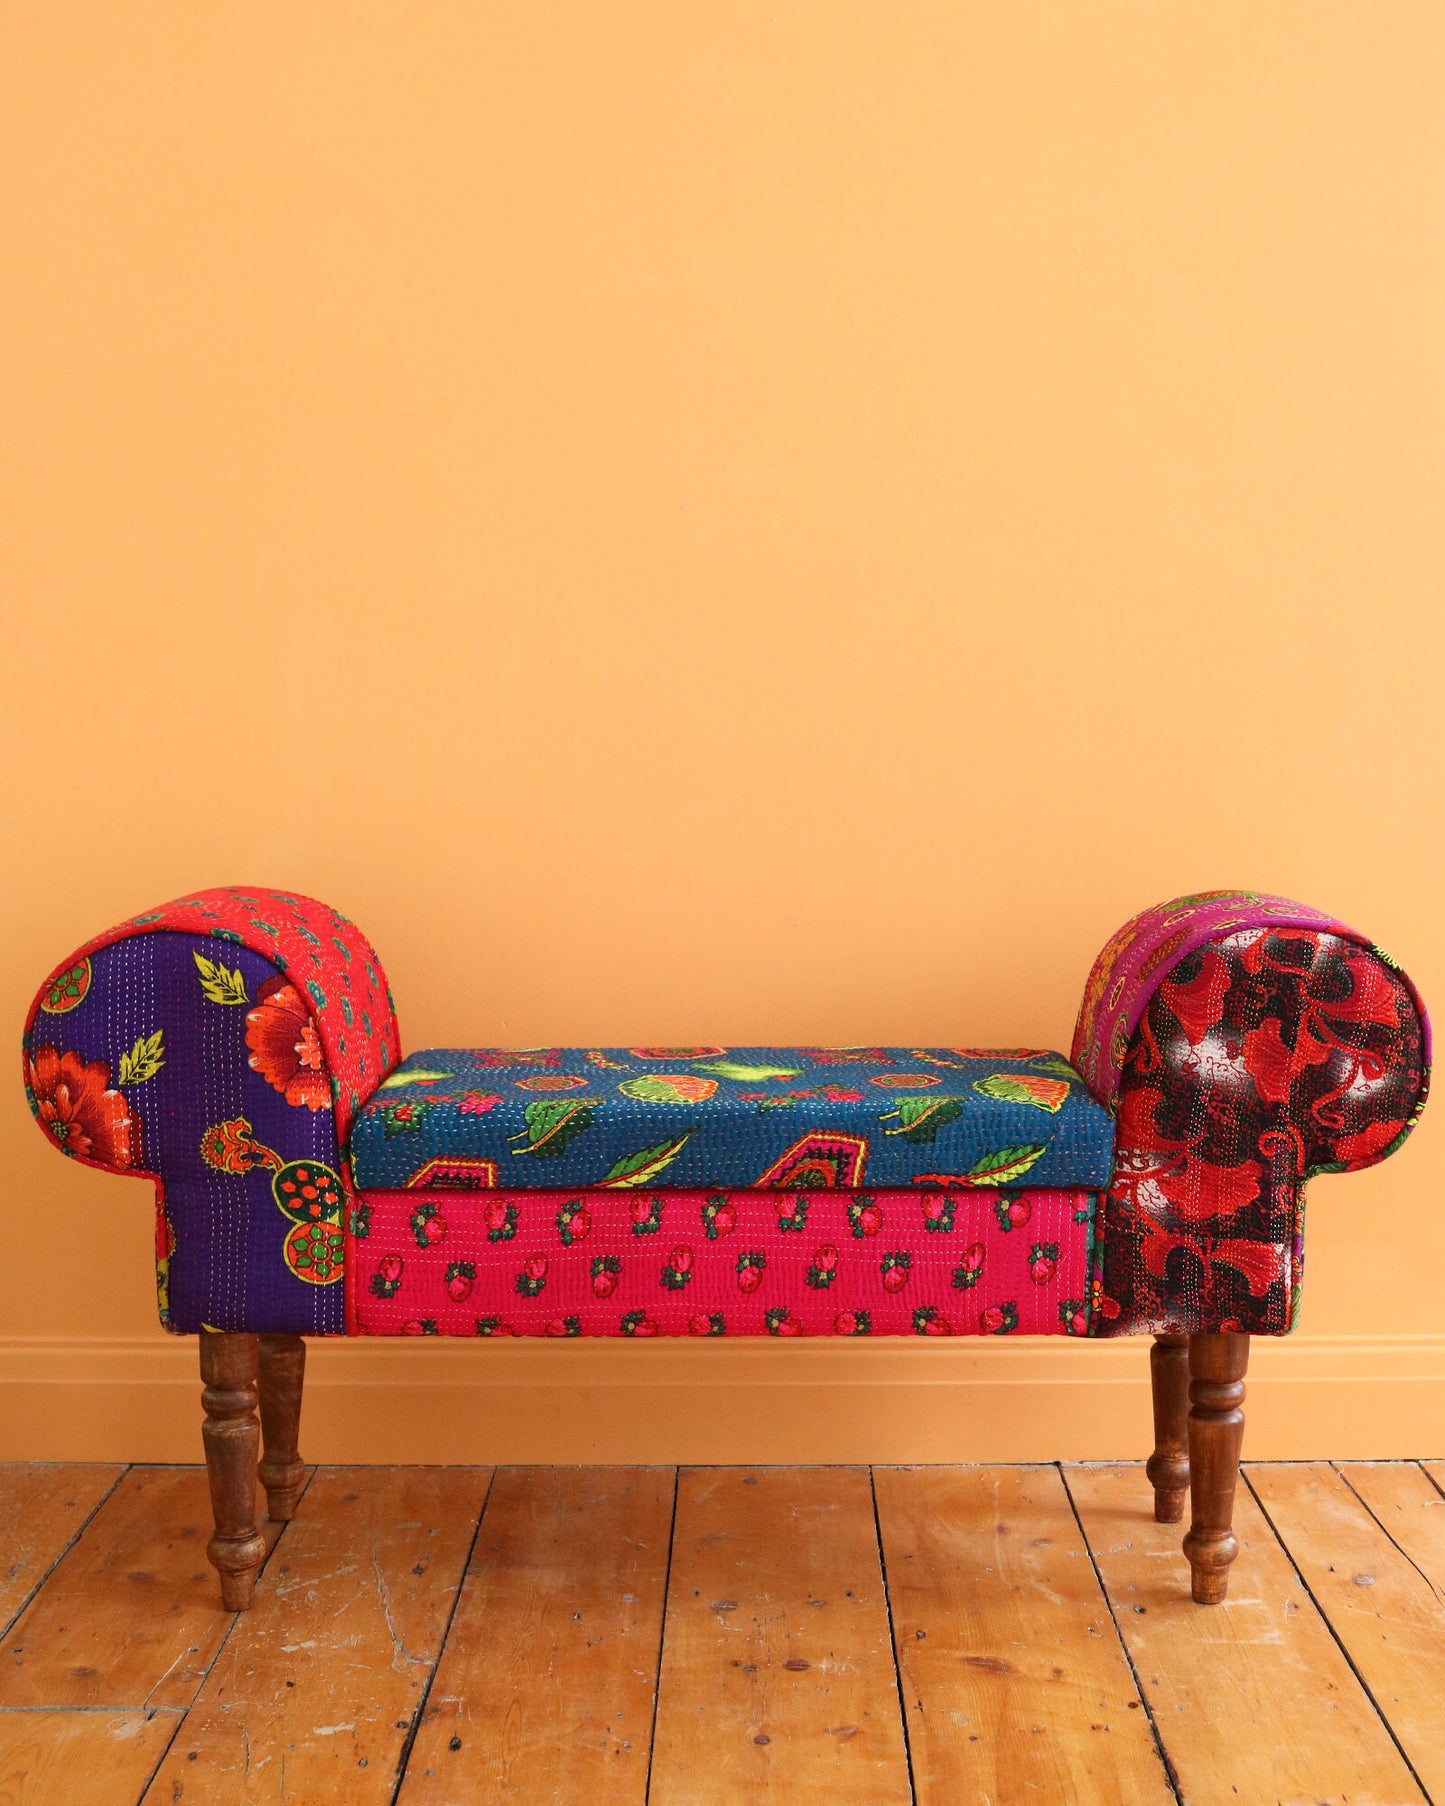 Hand-Stitched Vintage Scroll Bench with Storage, No. 5